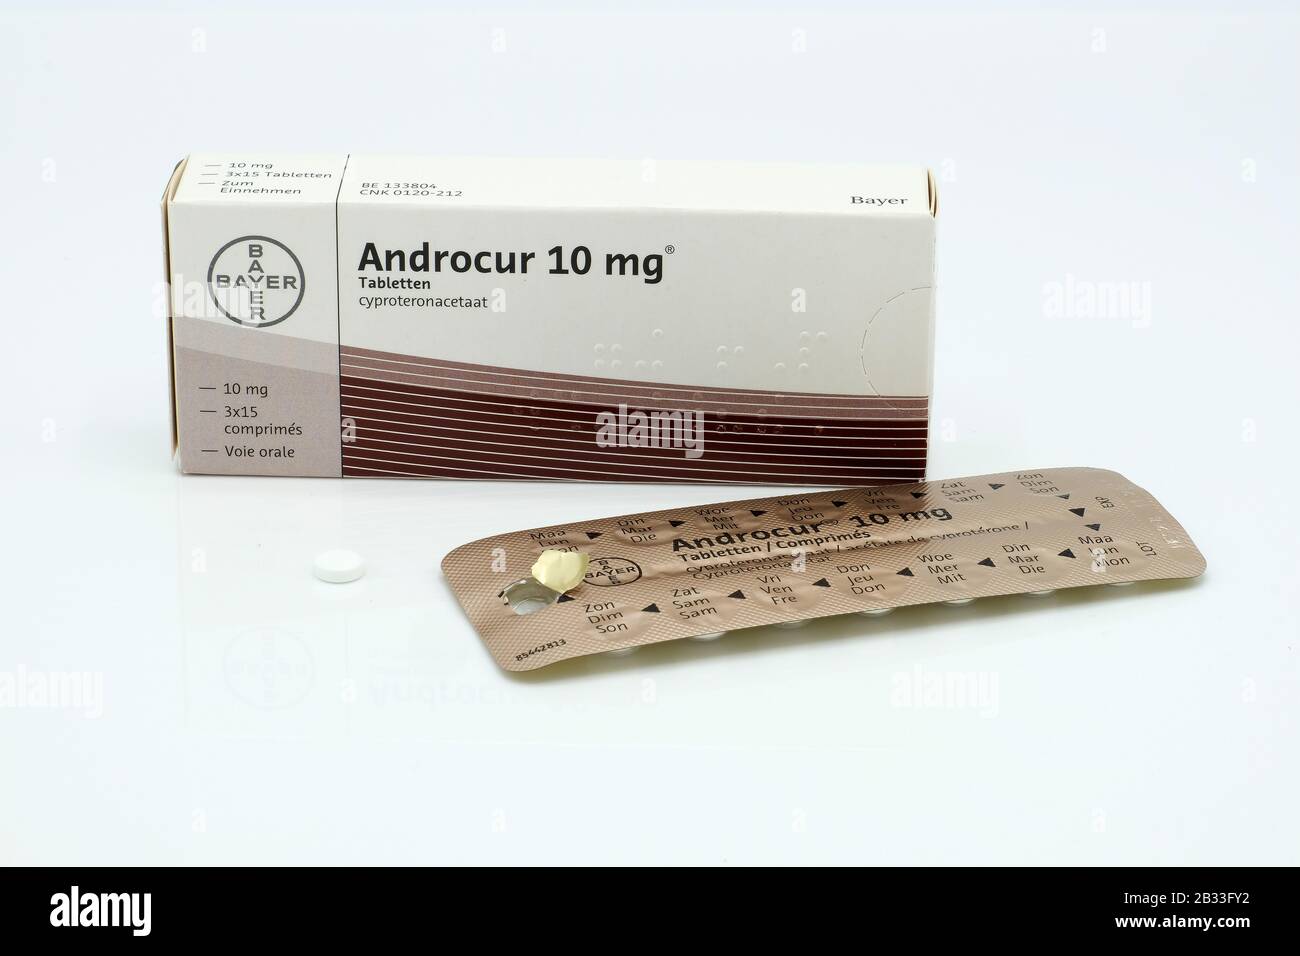 Androcur (cyproterone acetate) 10mg box and tablets, manufactured by Bayer Stock Photo